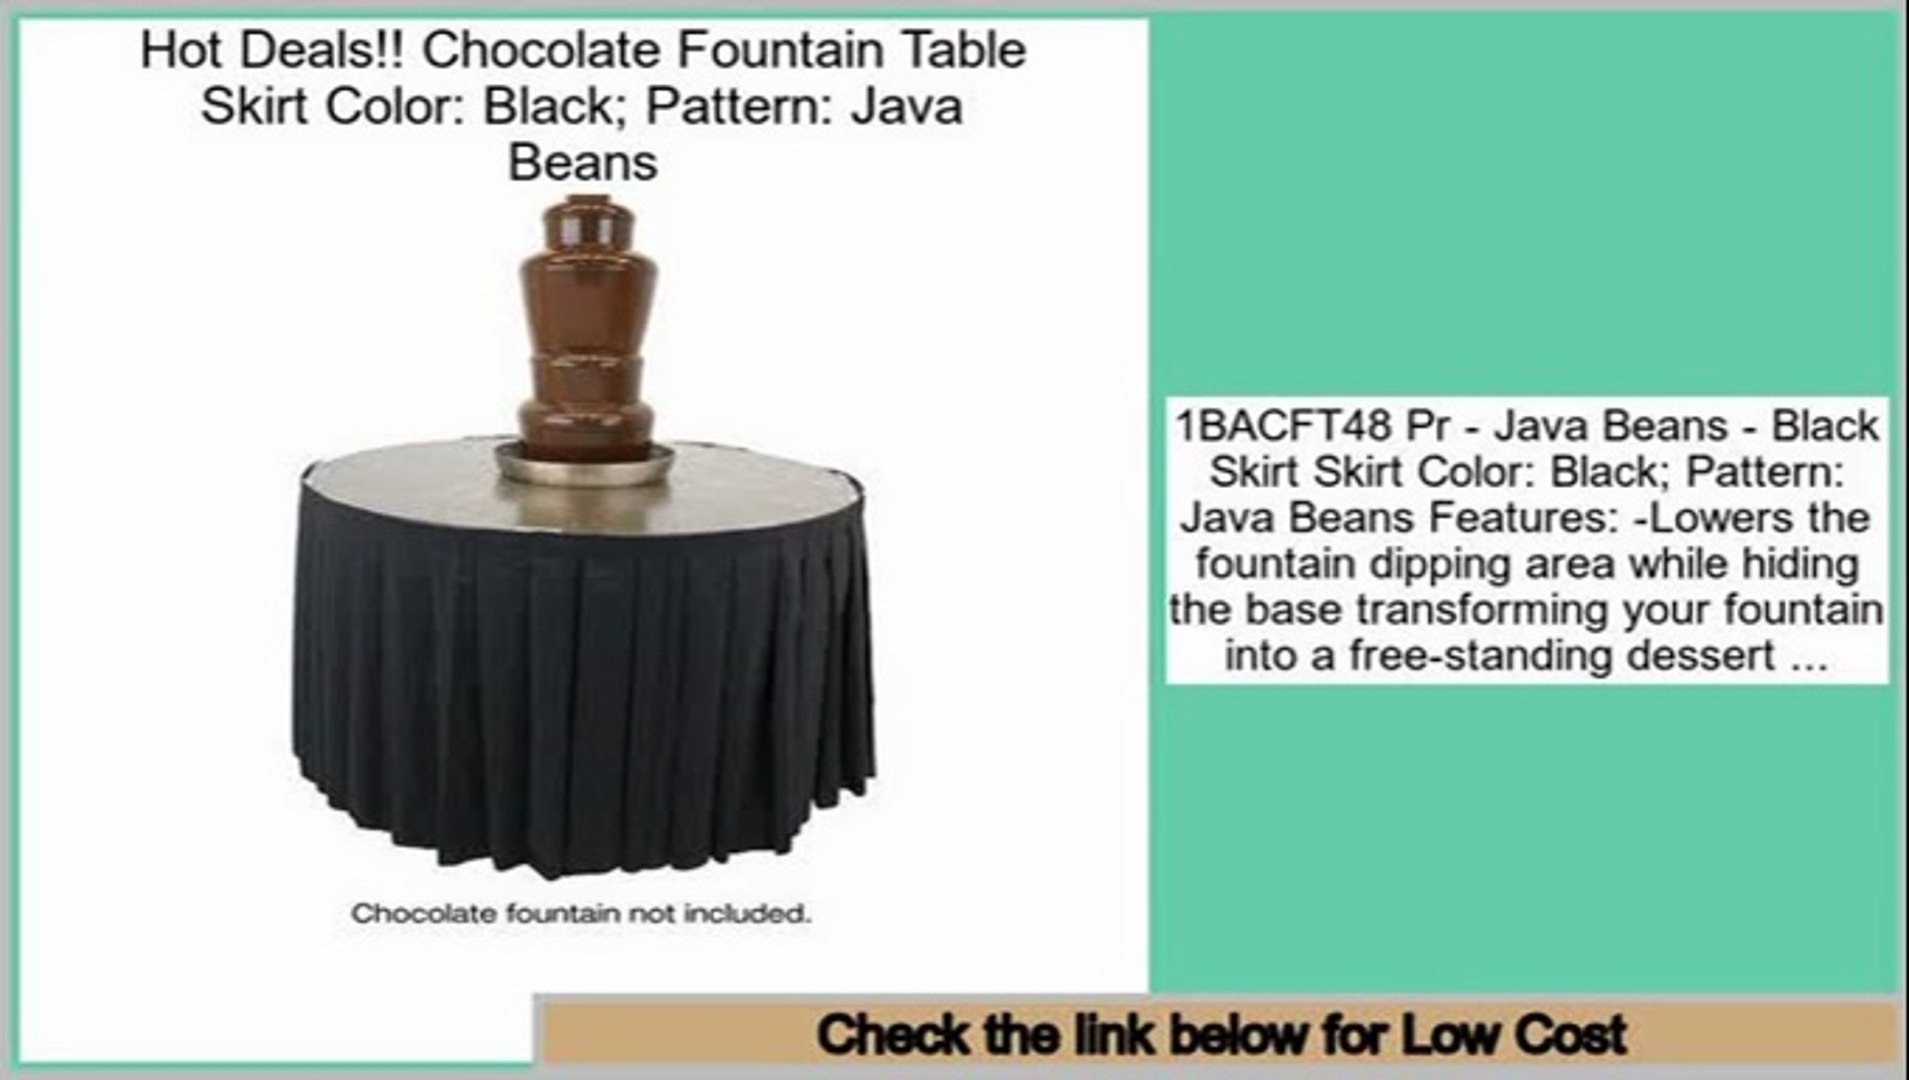 Last Minute Chocolate Fountain Table Skirt Color: Black; Pattern: Java Beans